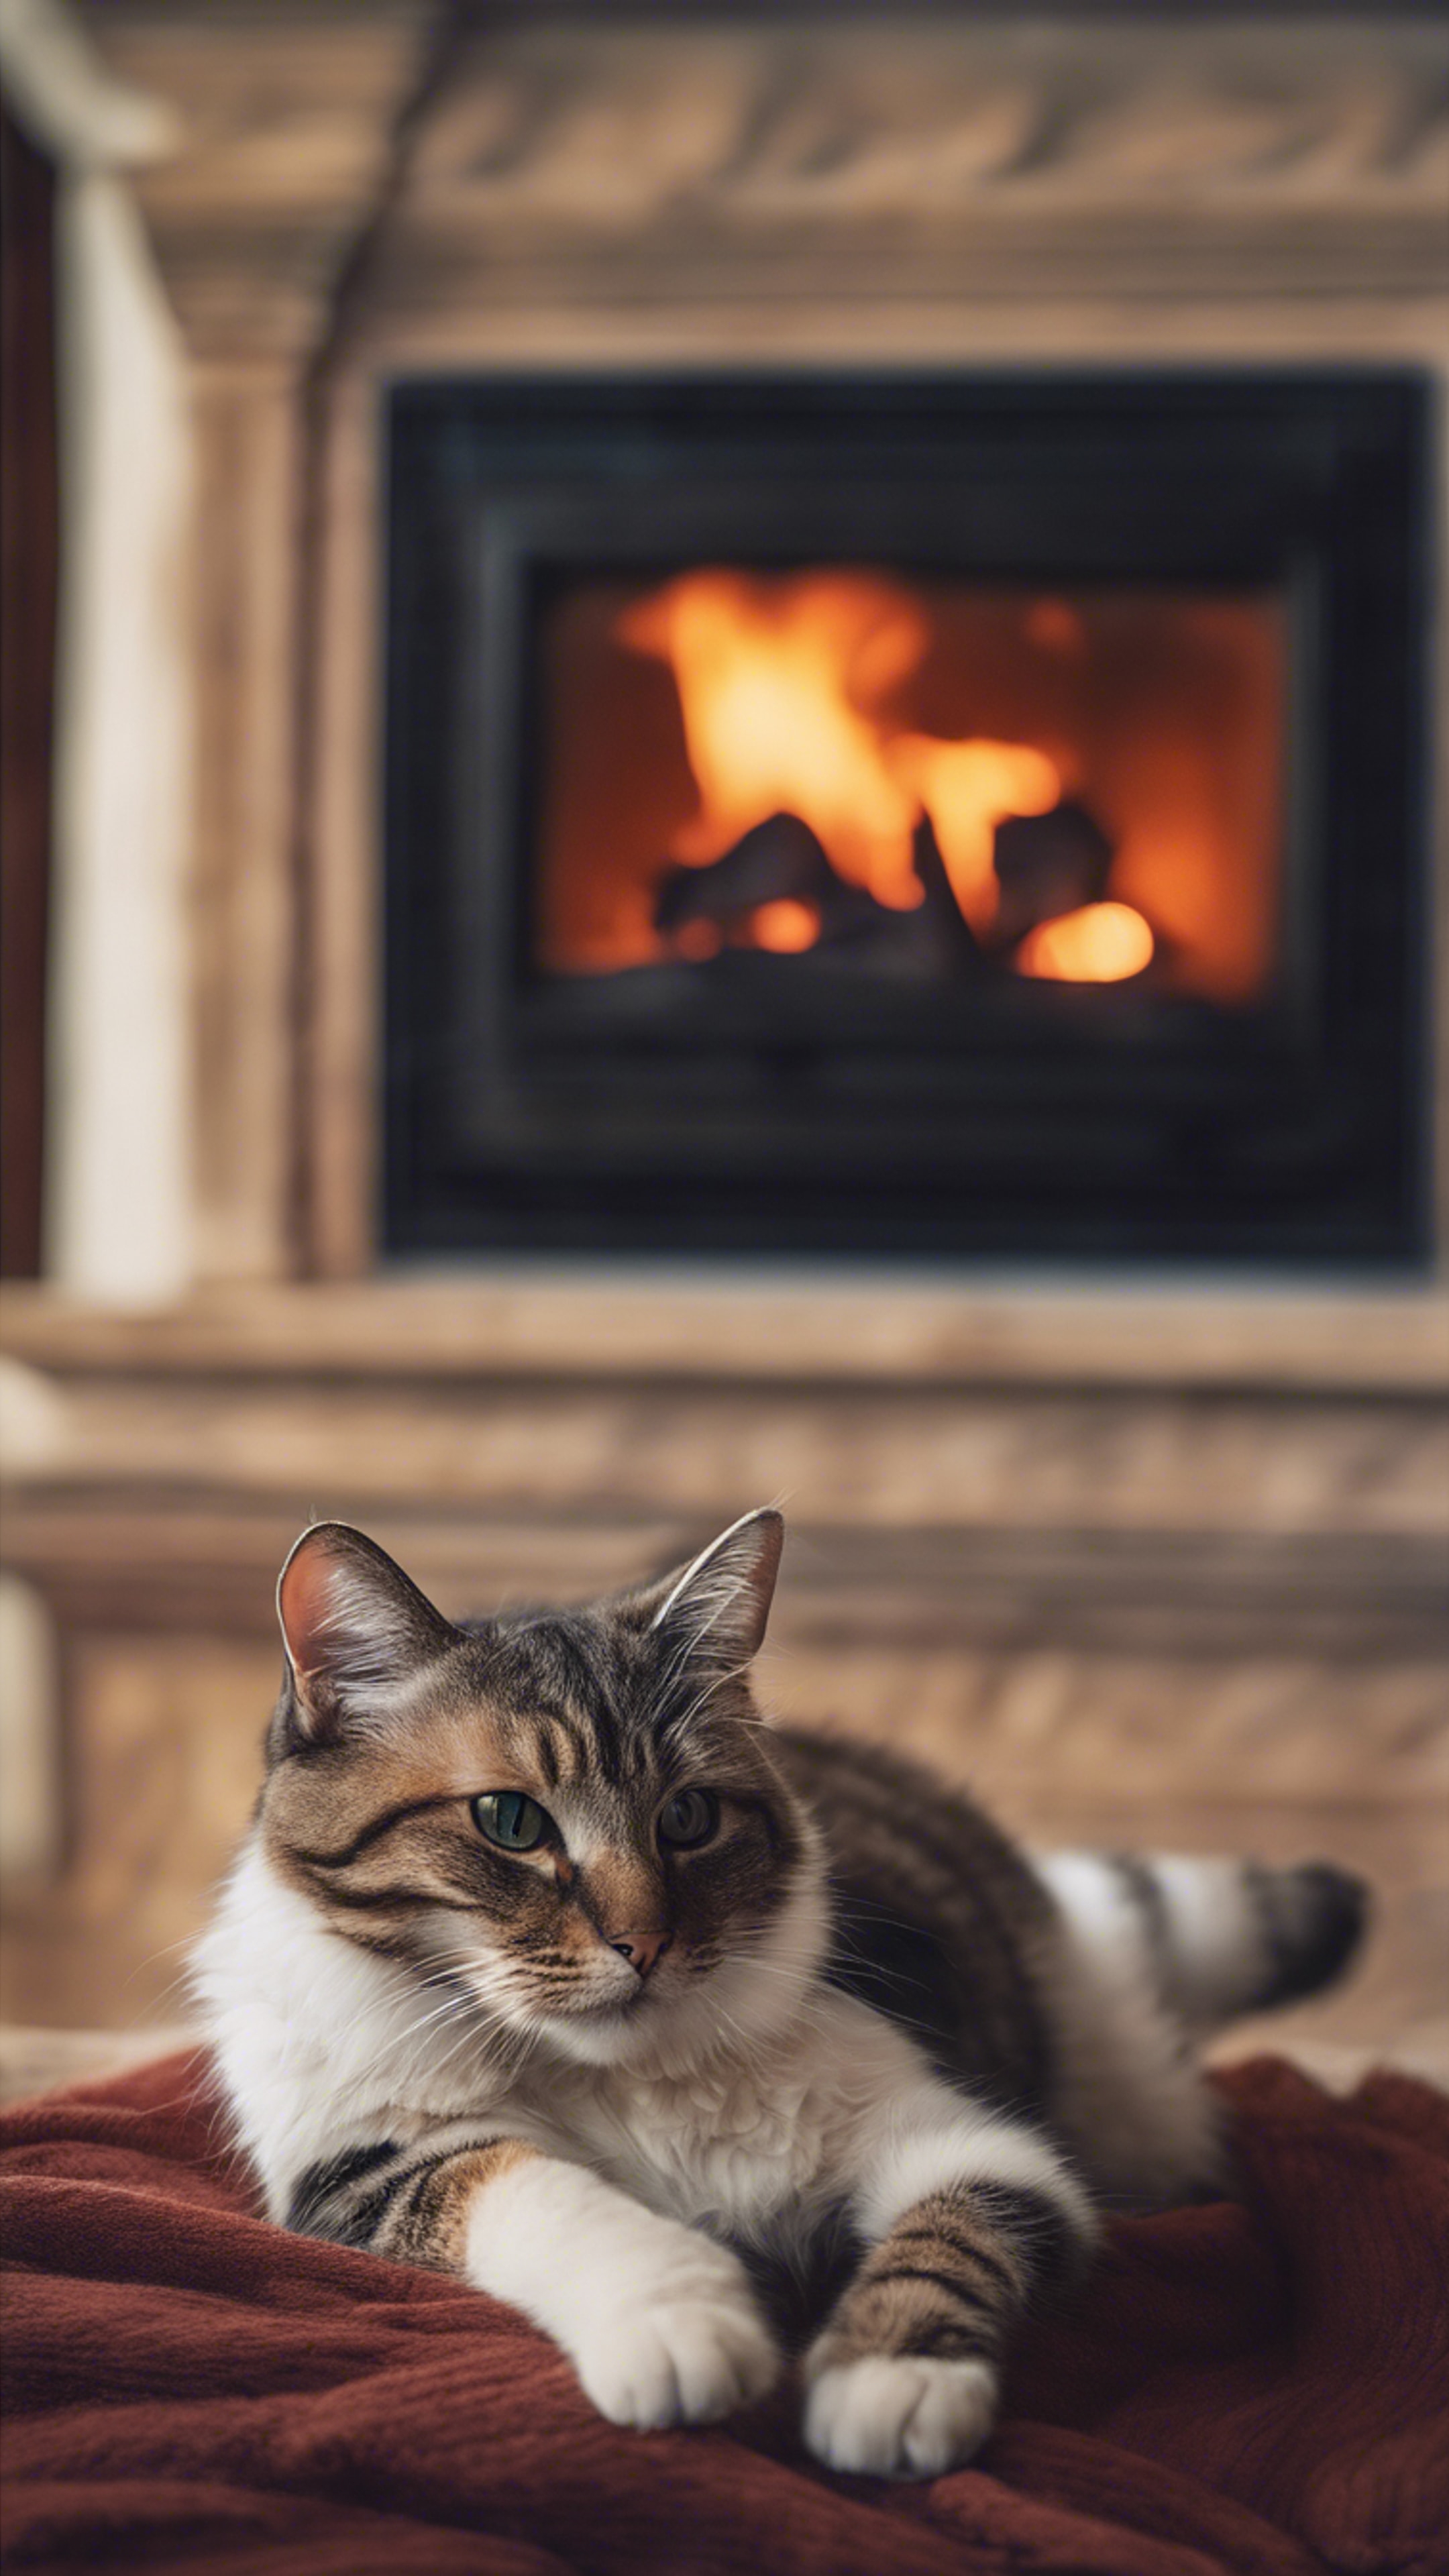 A cat lounging in front of a roaring fireplace, completely mesmerized by the flickering flames. Tapeta na zeď[f30d5ca7e04c497dade0]